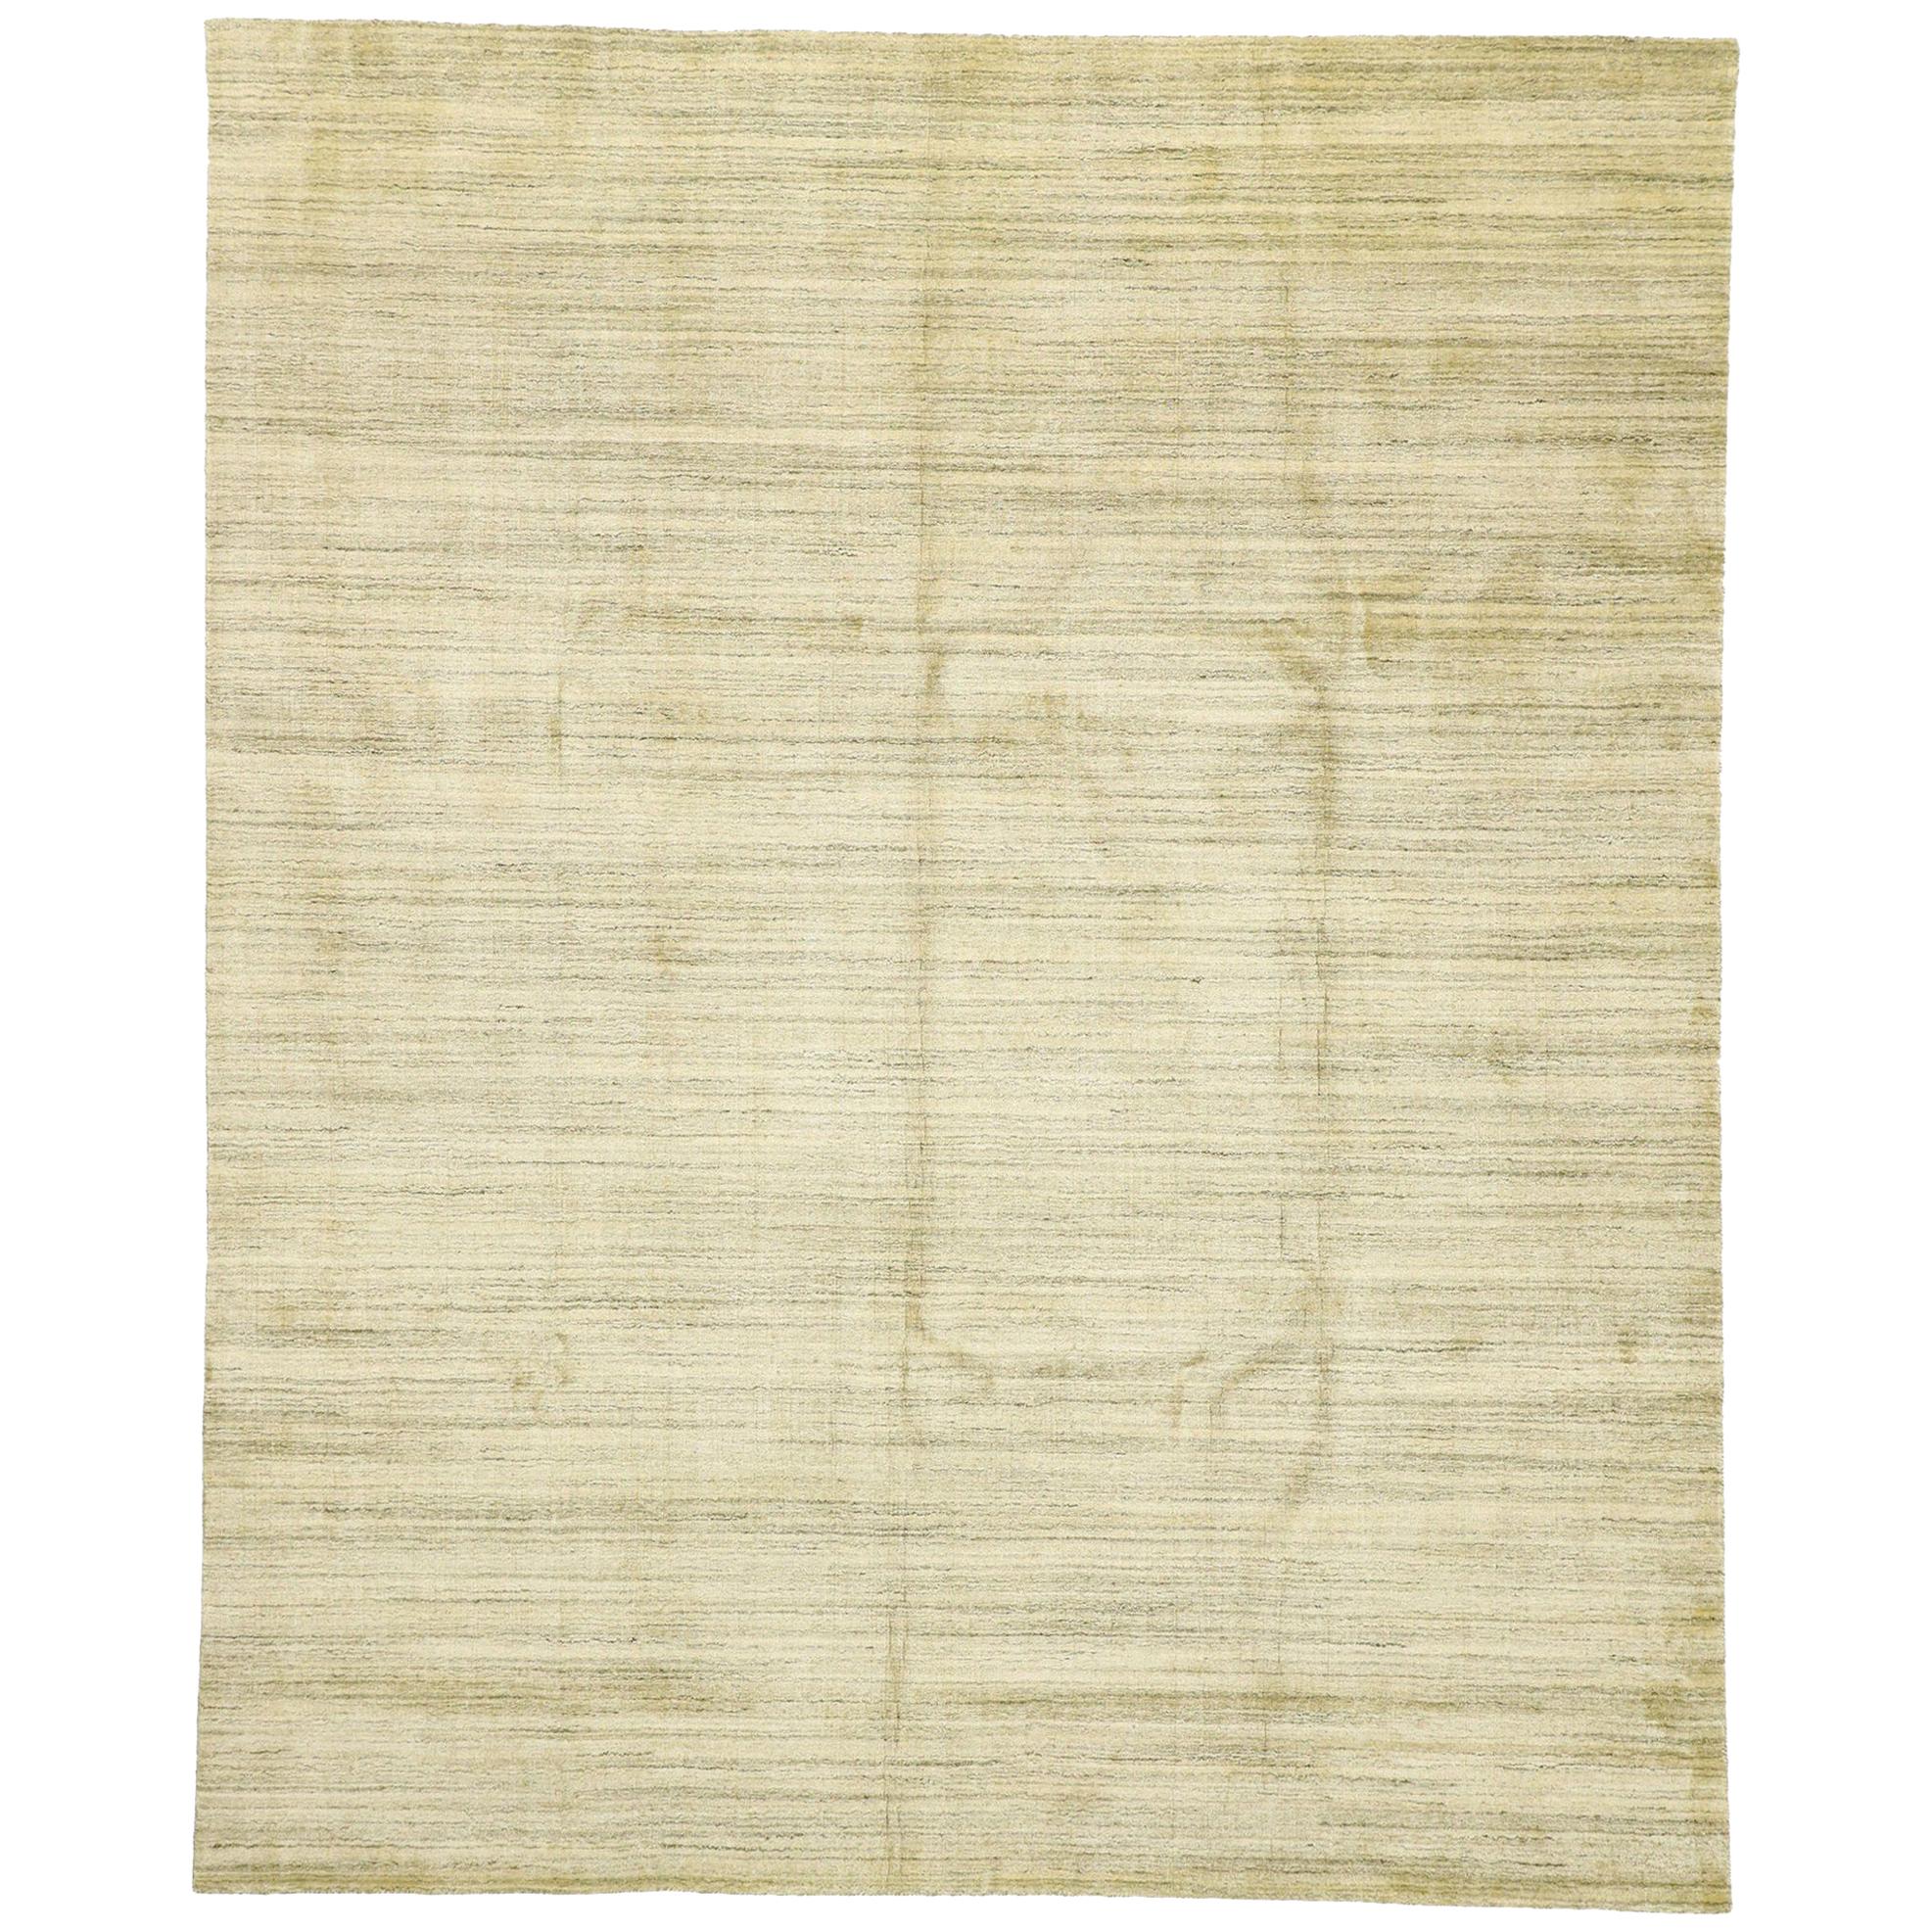 New Transitional Area Rug with Cozy, Hygge Vibes and Warm Amish-Shaker Style For Sale